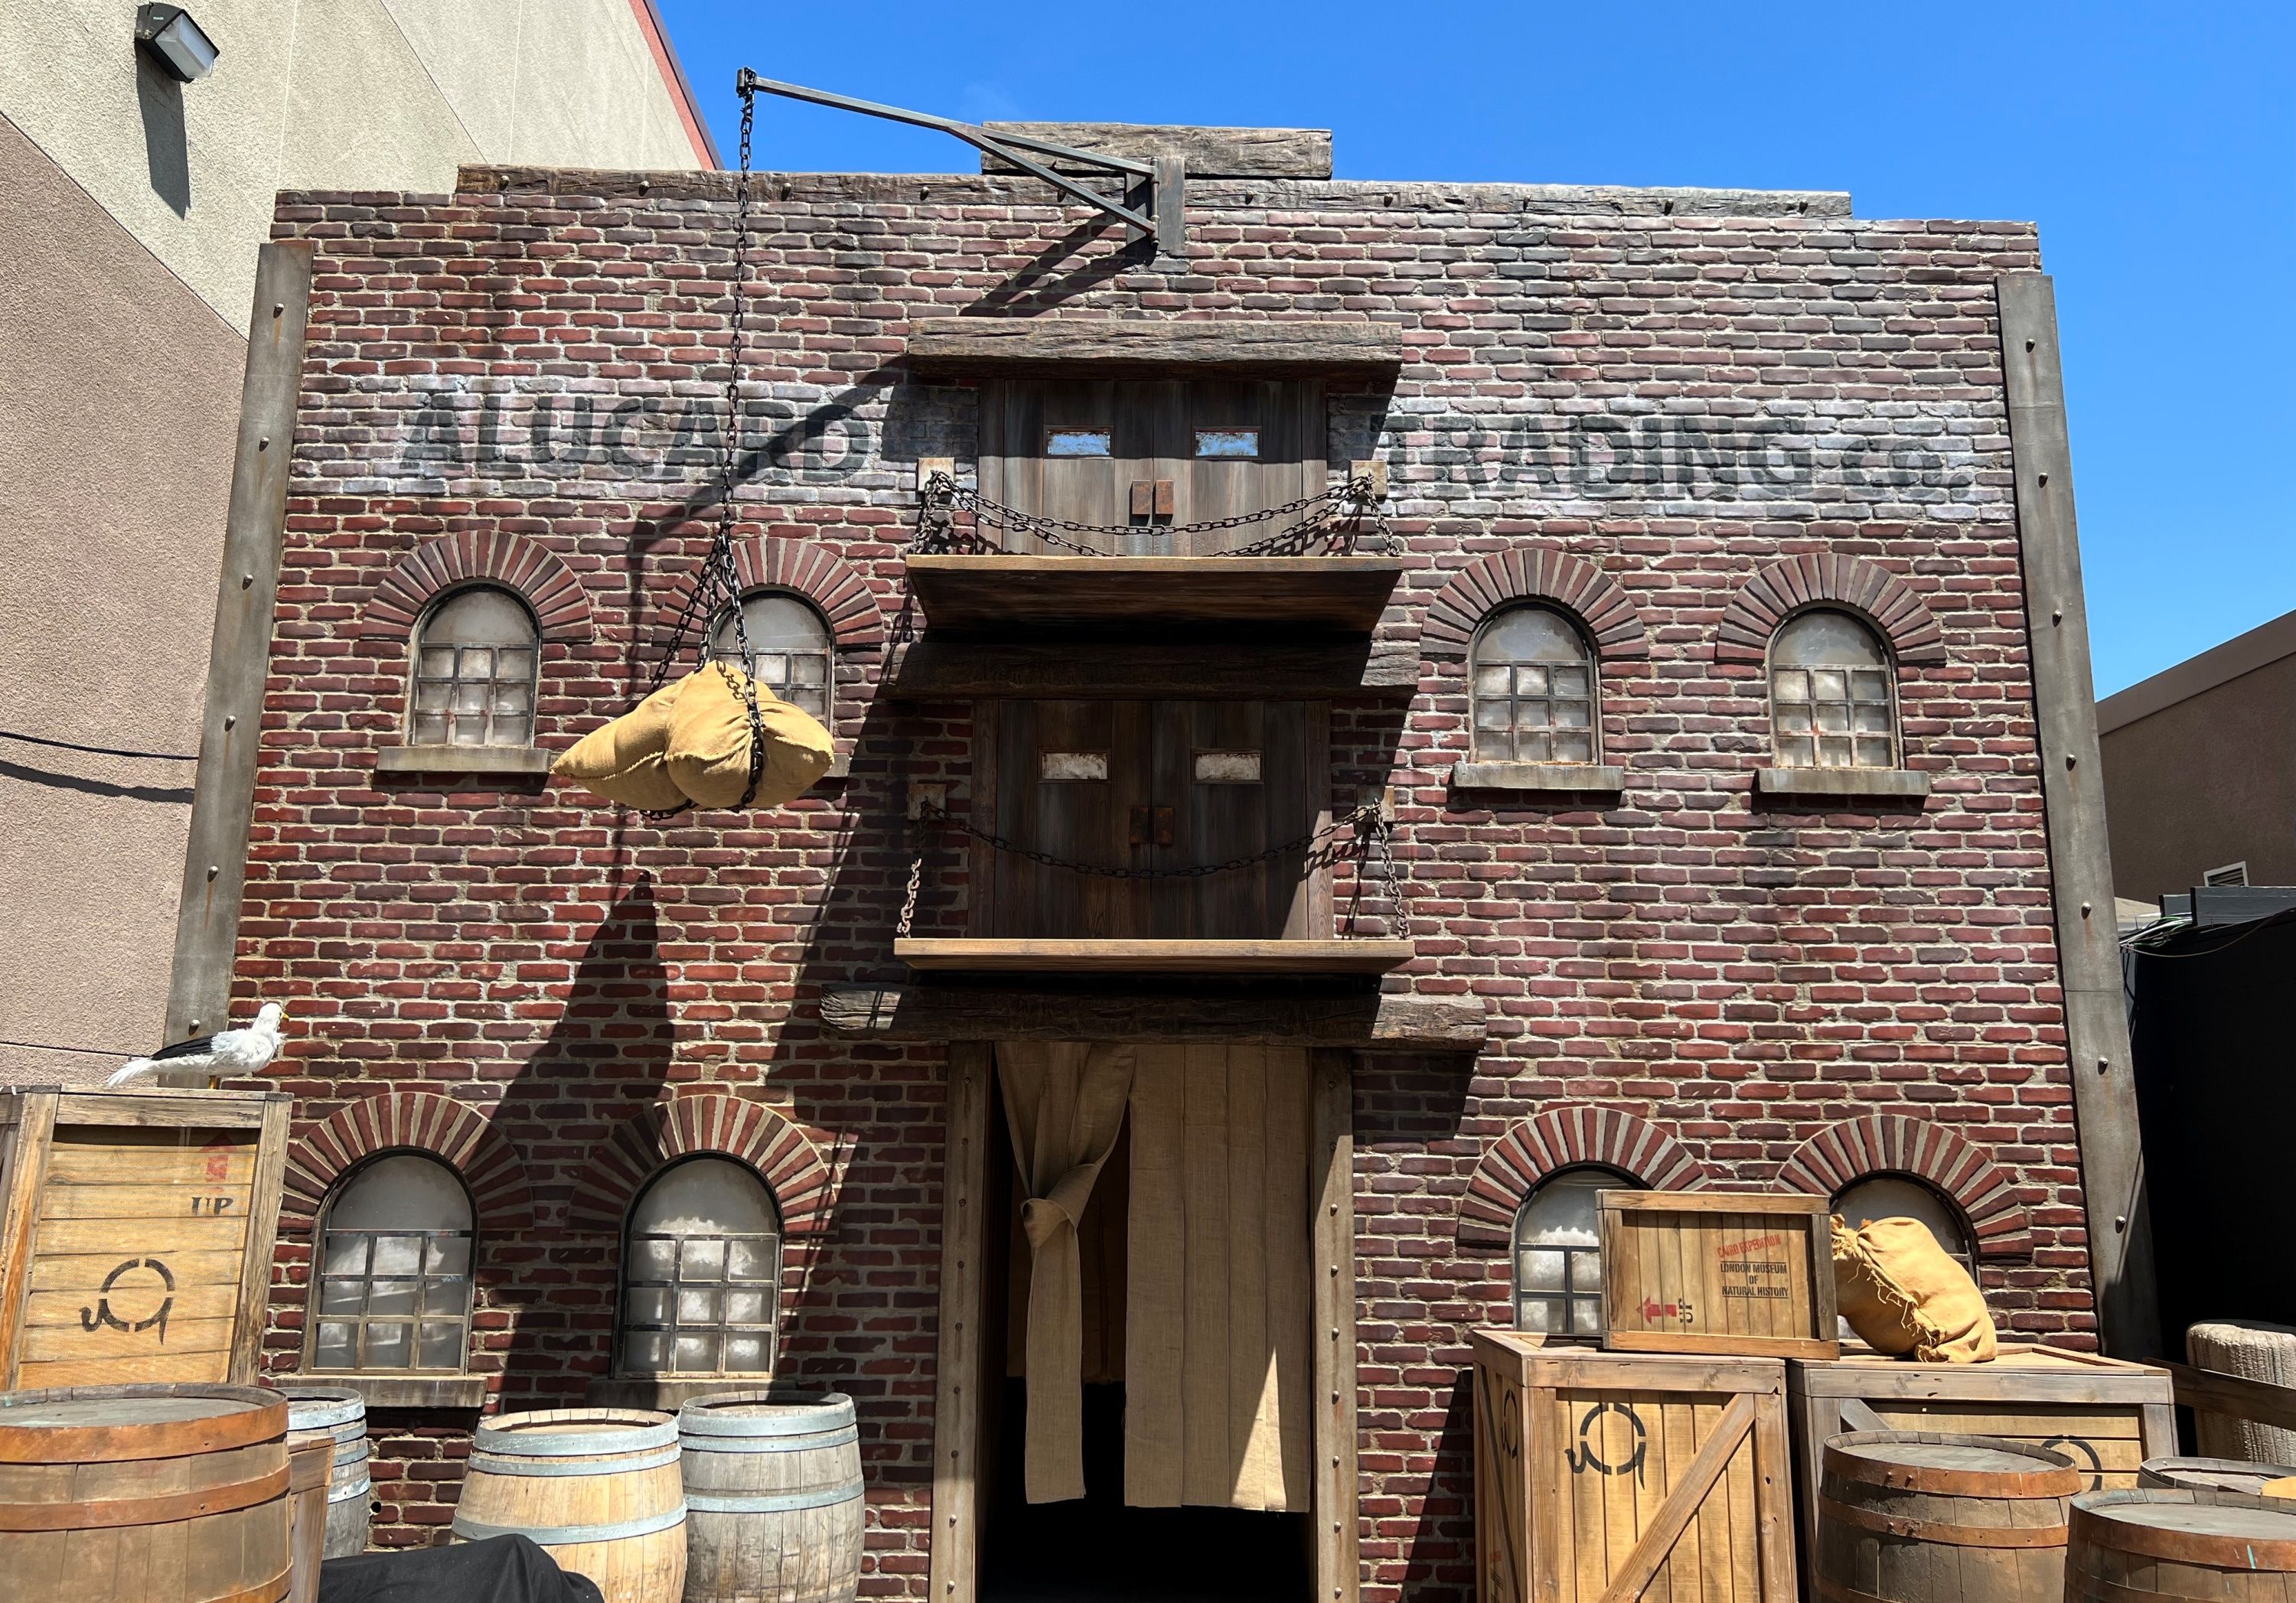 HHN 2022 Horrors of Blumhouse & Universal Monsters Haunted House Images